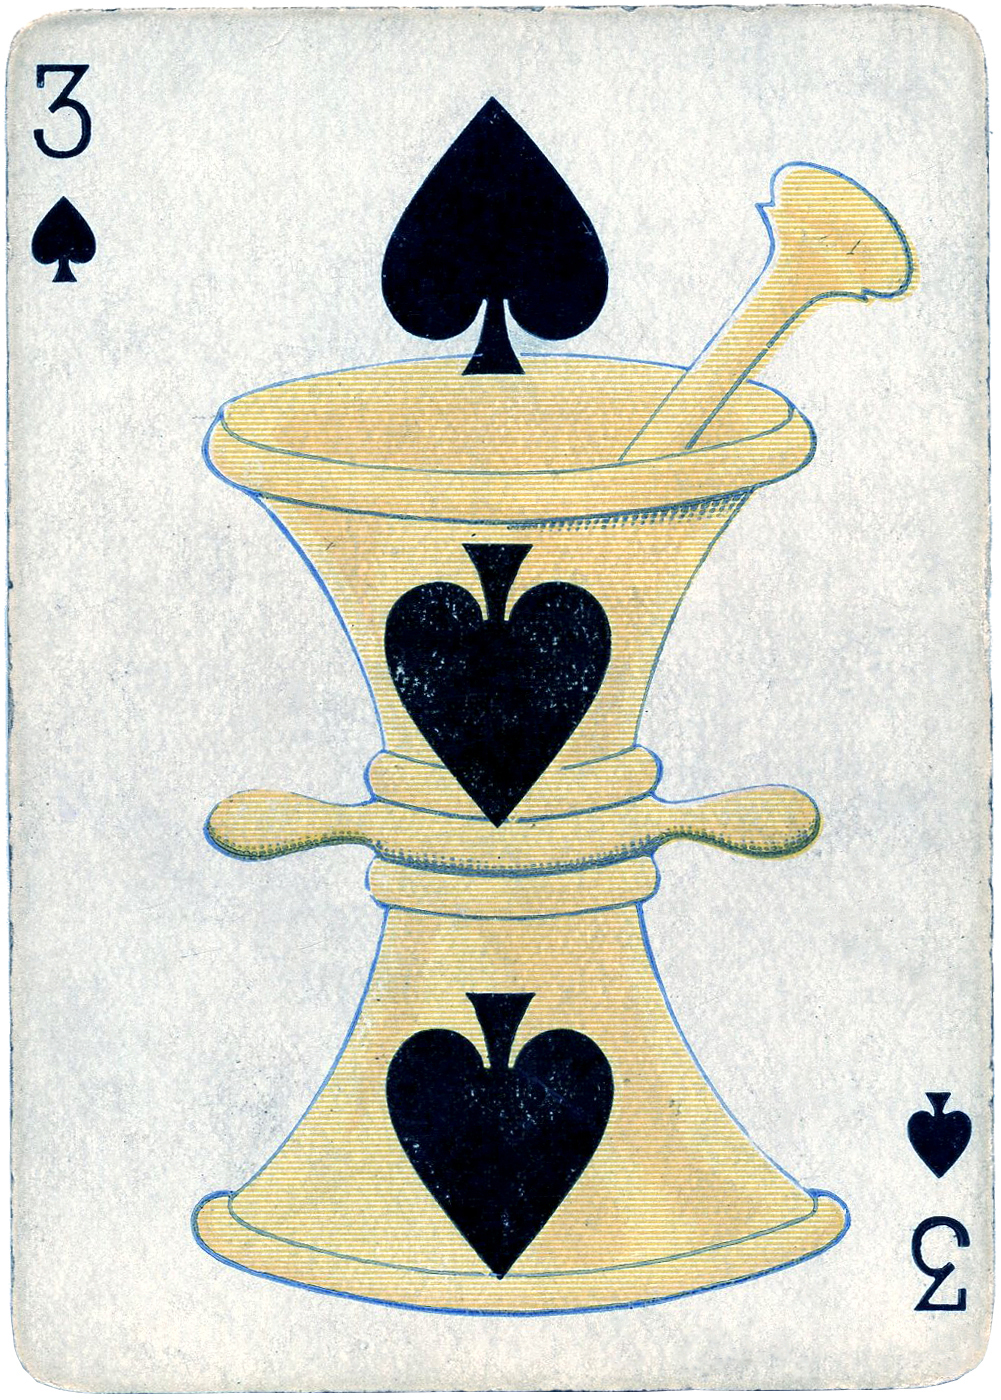 Vintage Playing Card Images - The Graphics Fairy